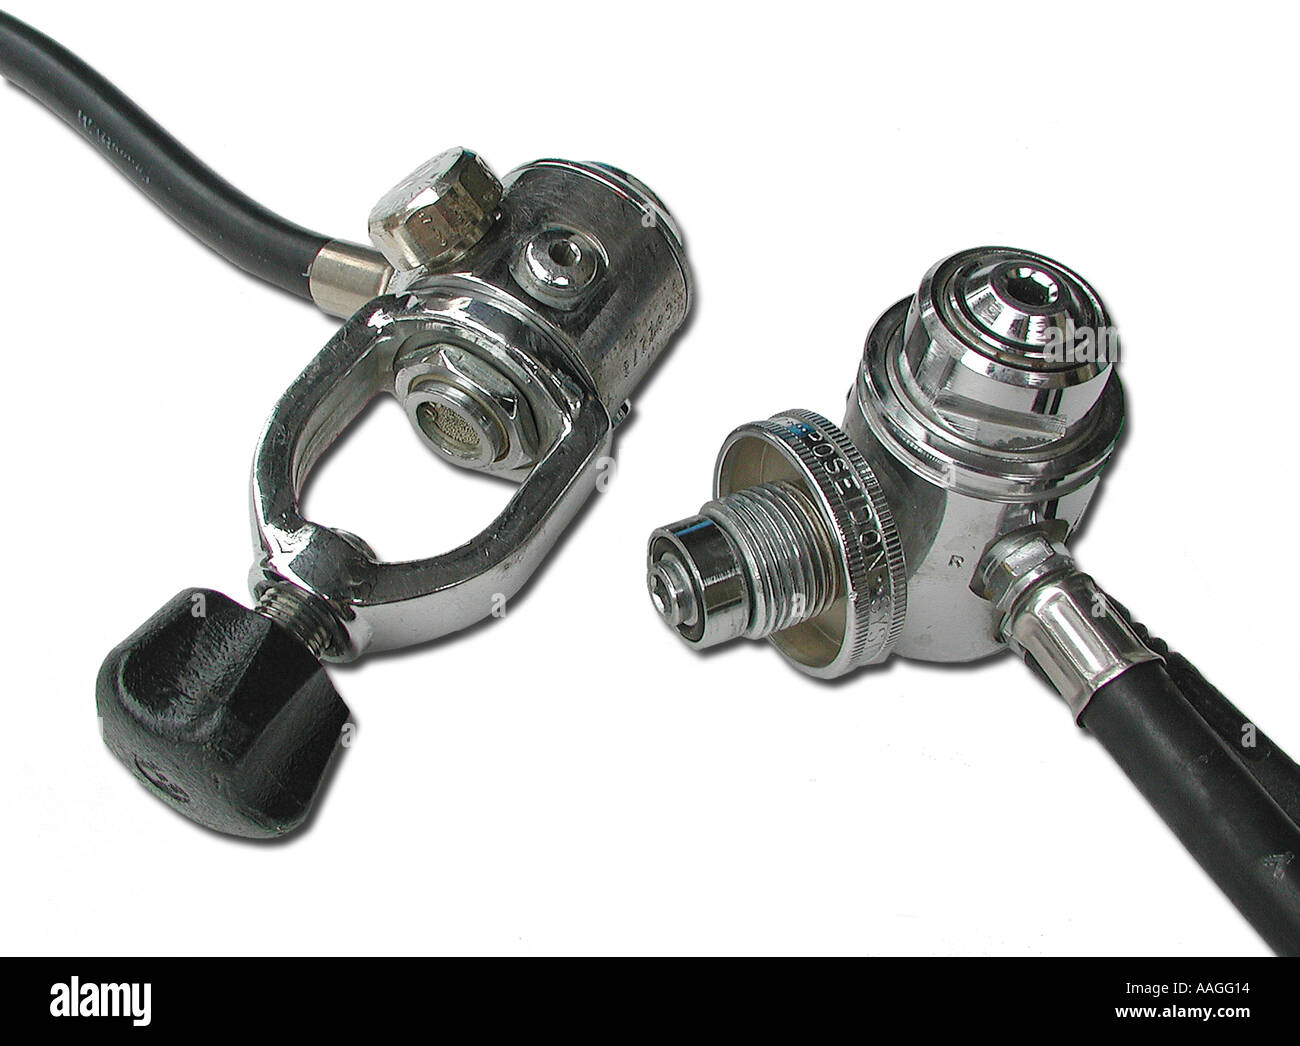 Diving equipment showing difference between an A and DIN fitting first stage valve Stock Photo